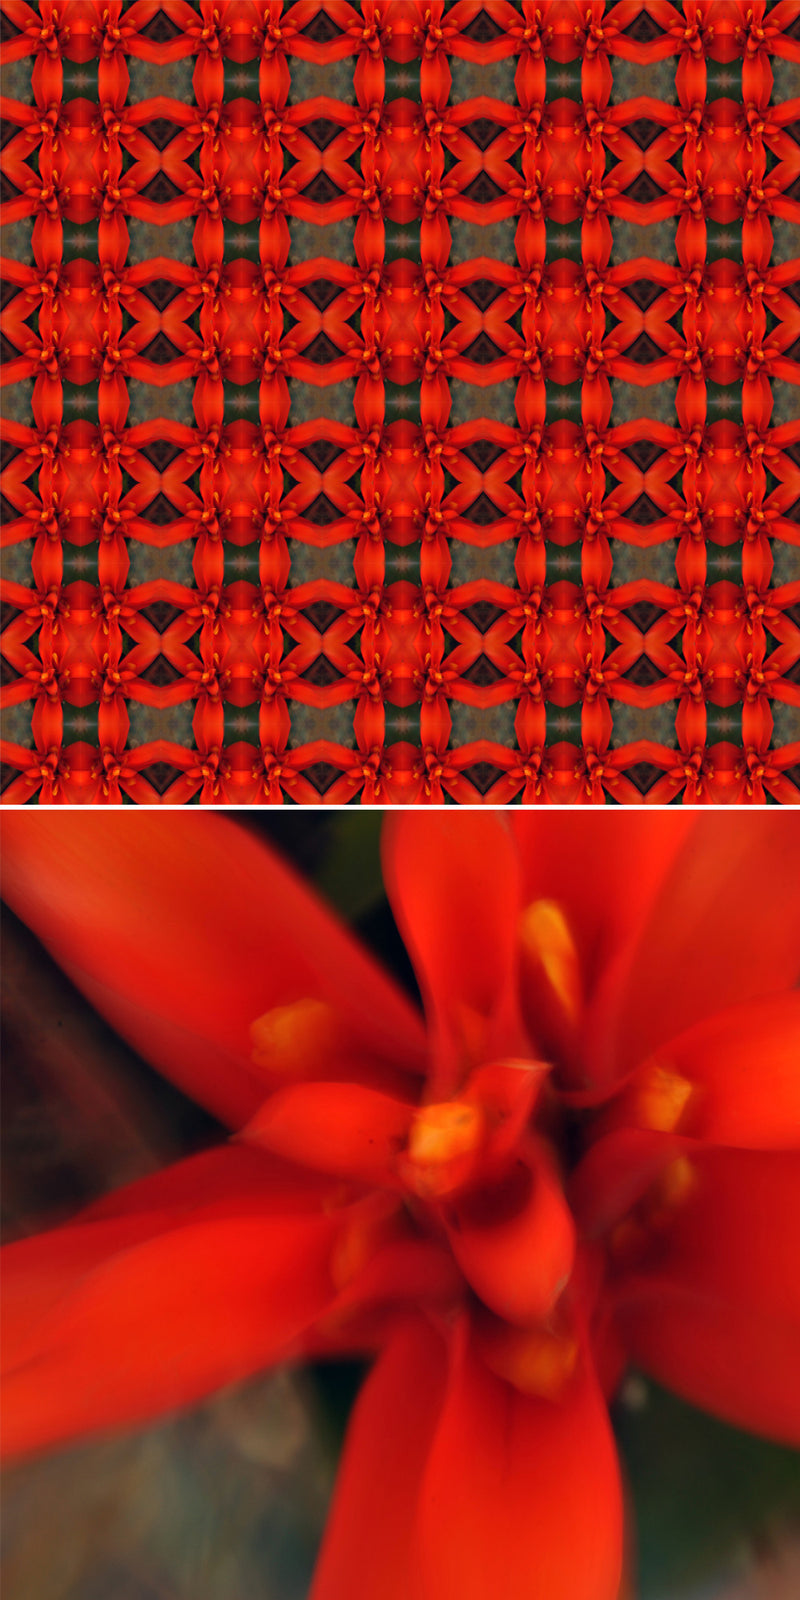 HNS03 - Red flower